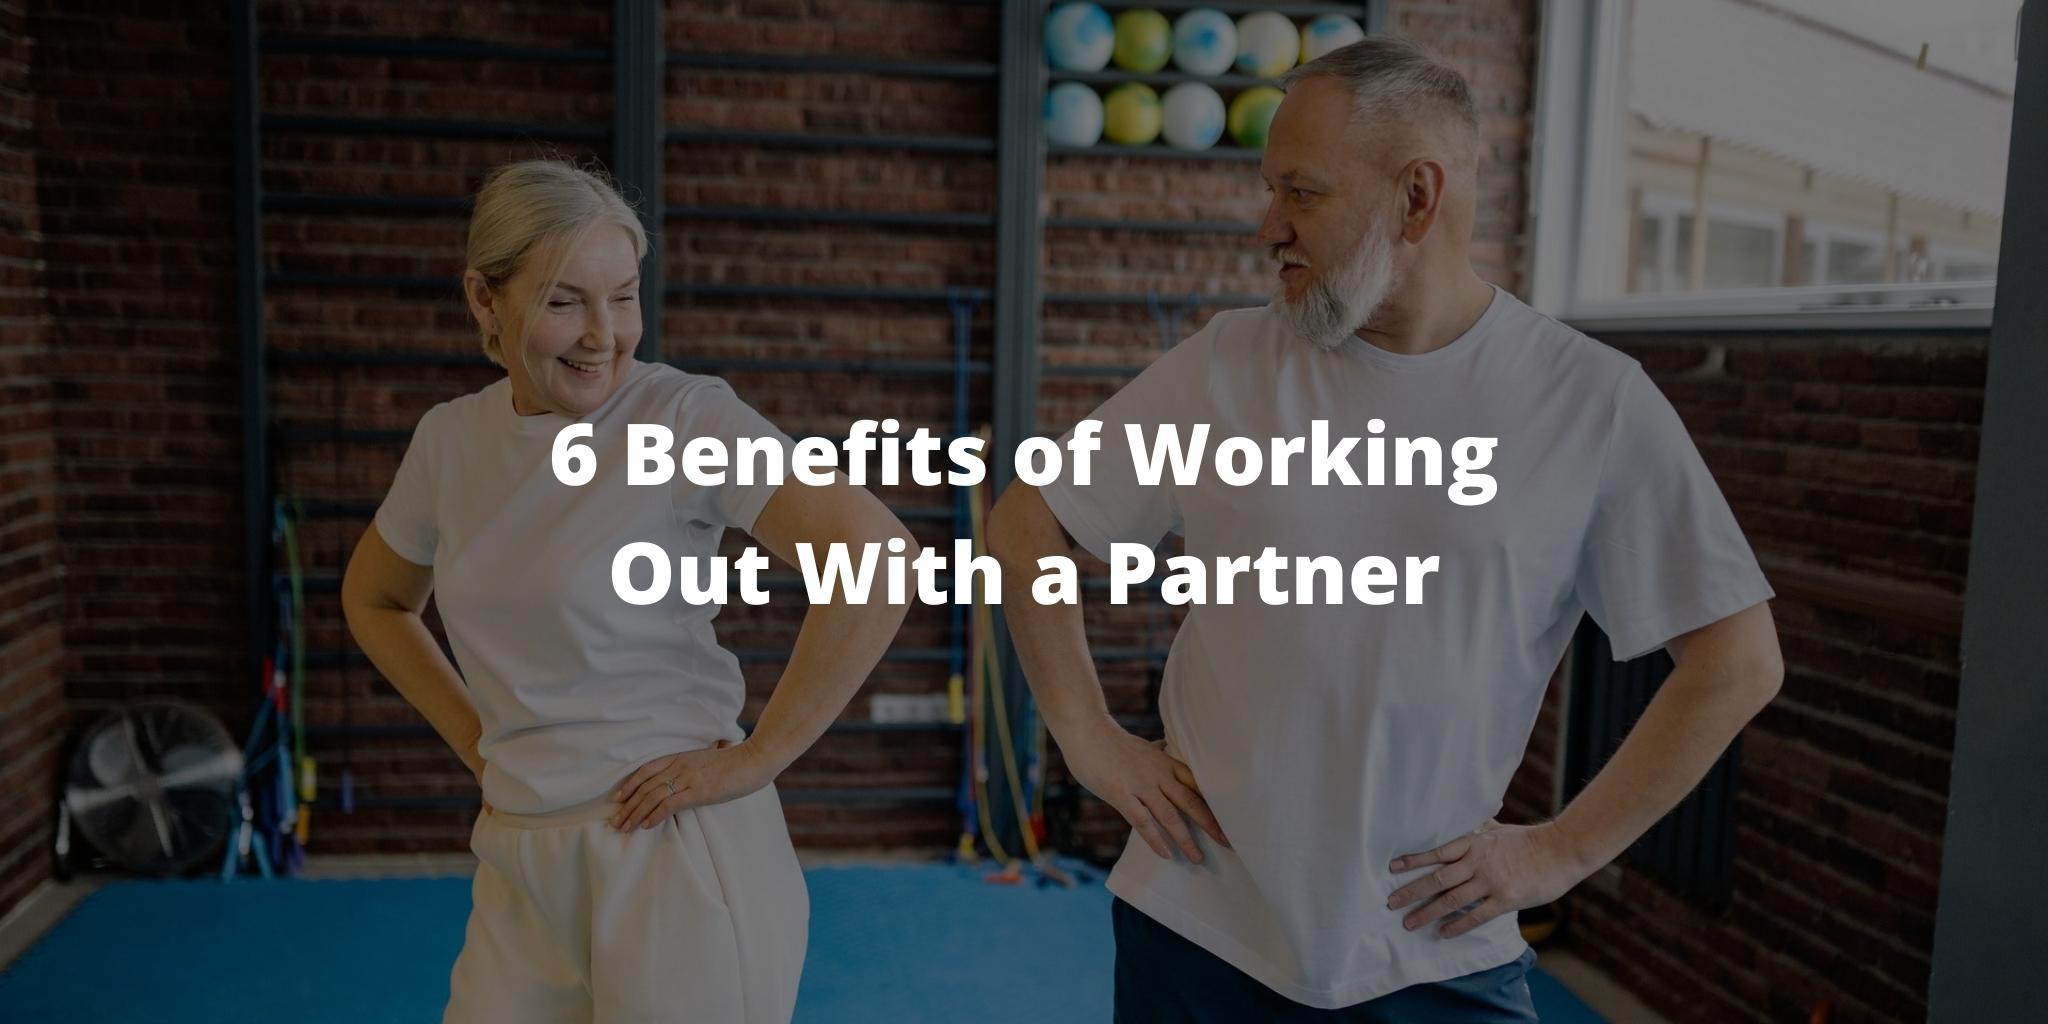 6 Benefits of Working Out With a Partner